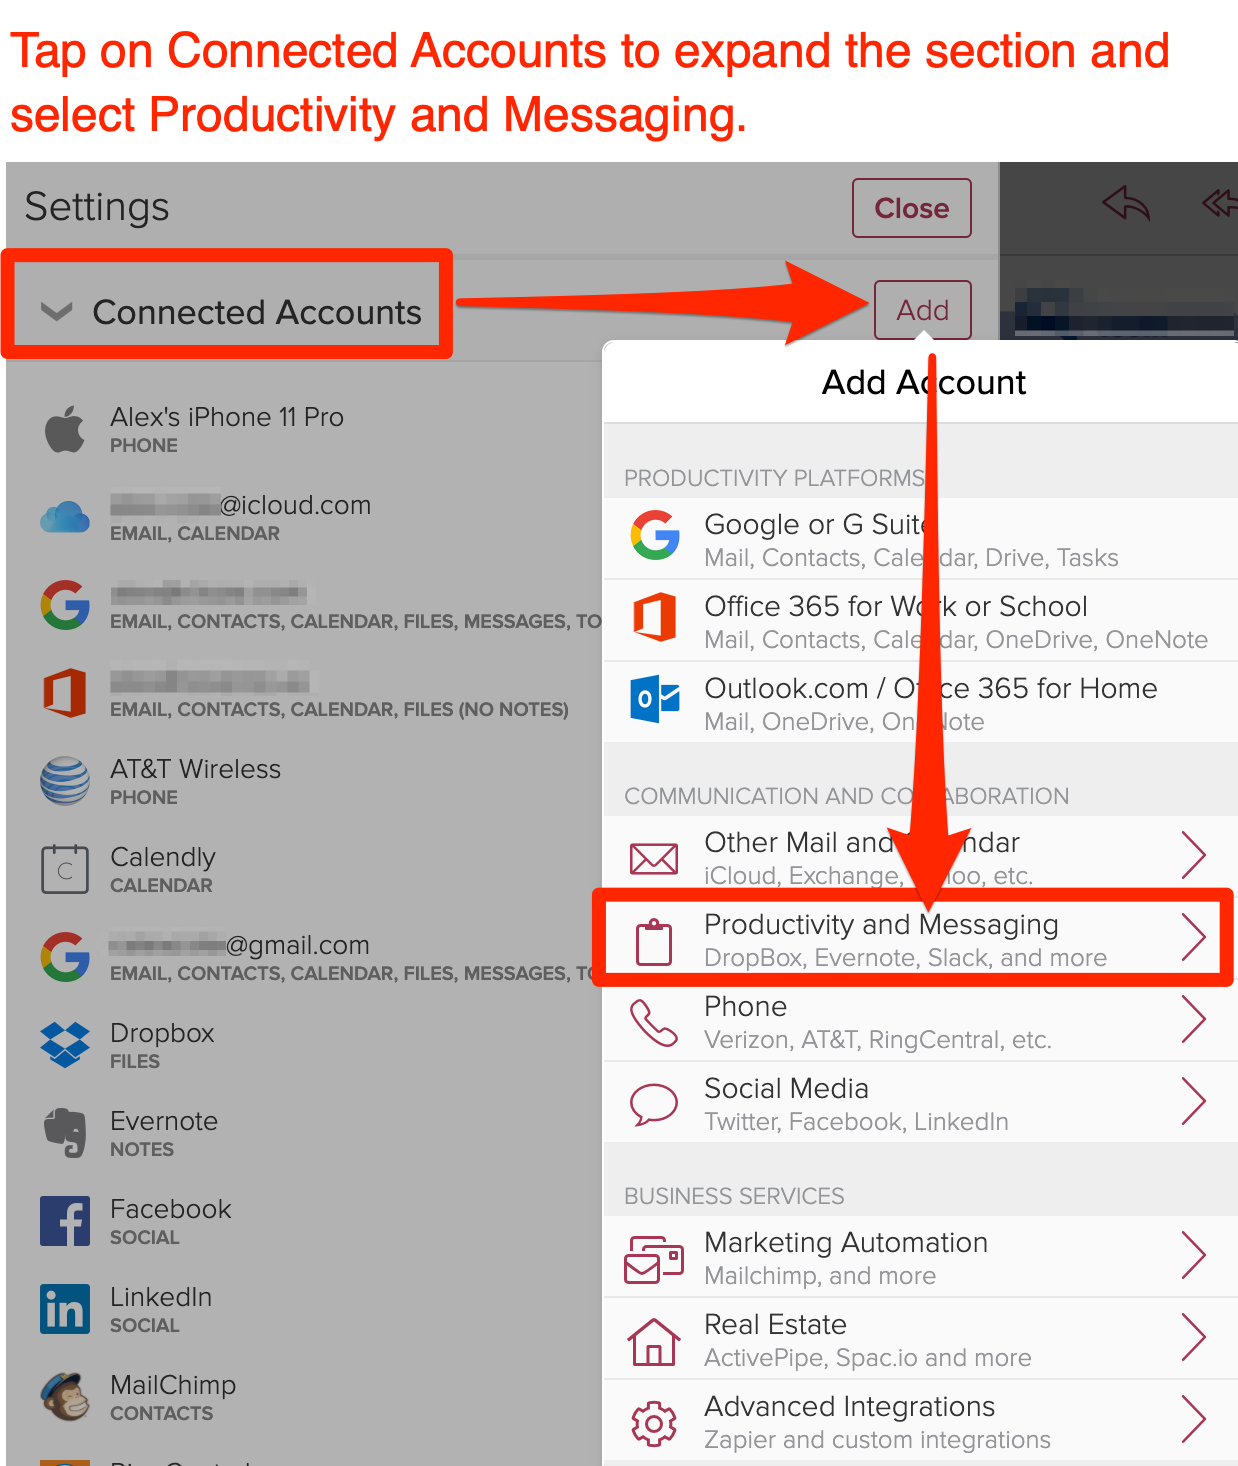 Tap on Connected Accounts to expand the section and select Productivity and Messaging to Connect Calendly to Cloze CRM.